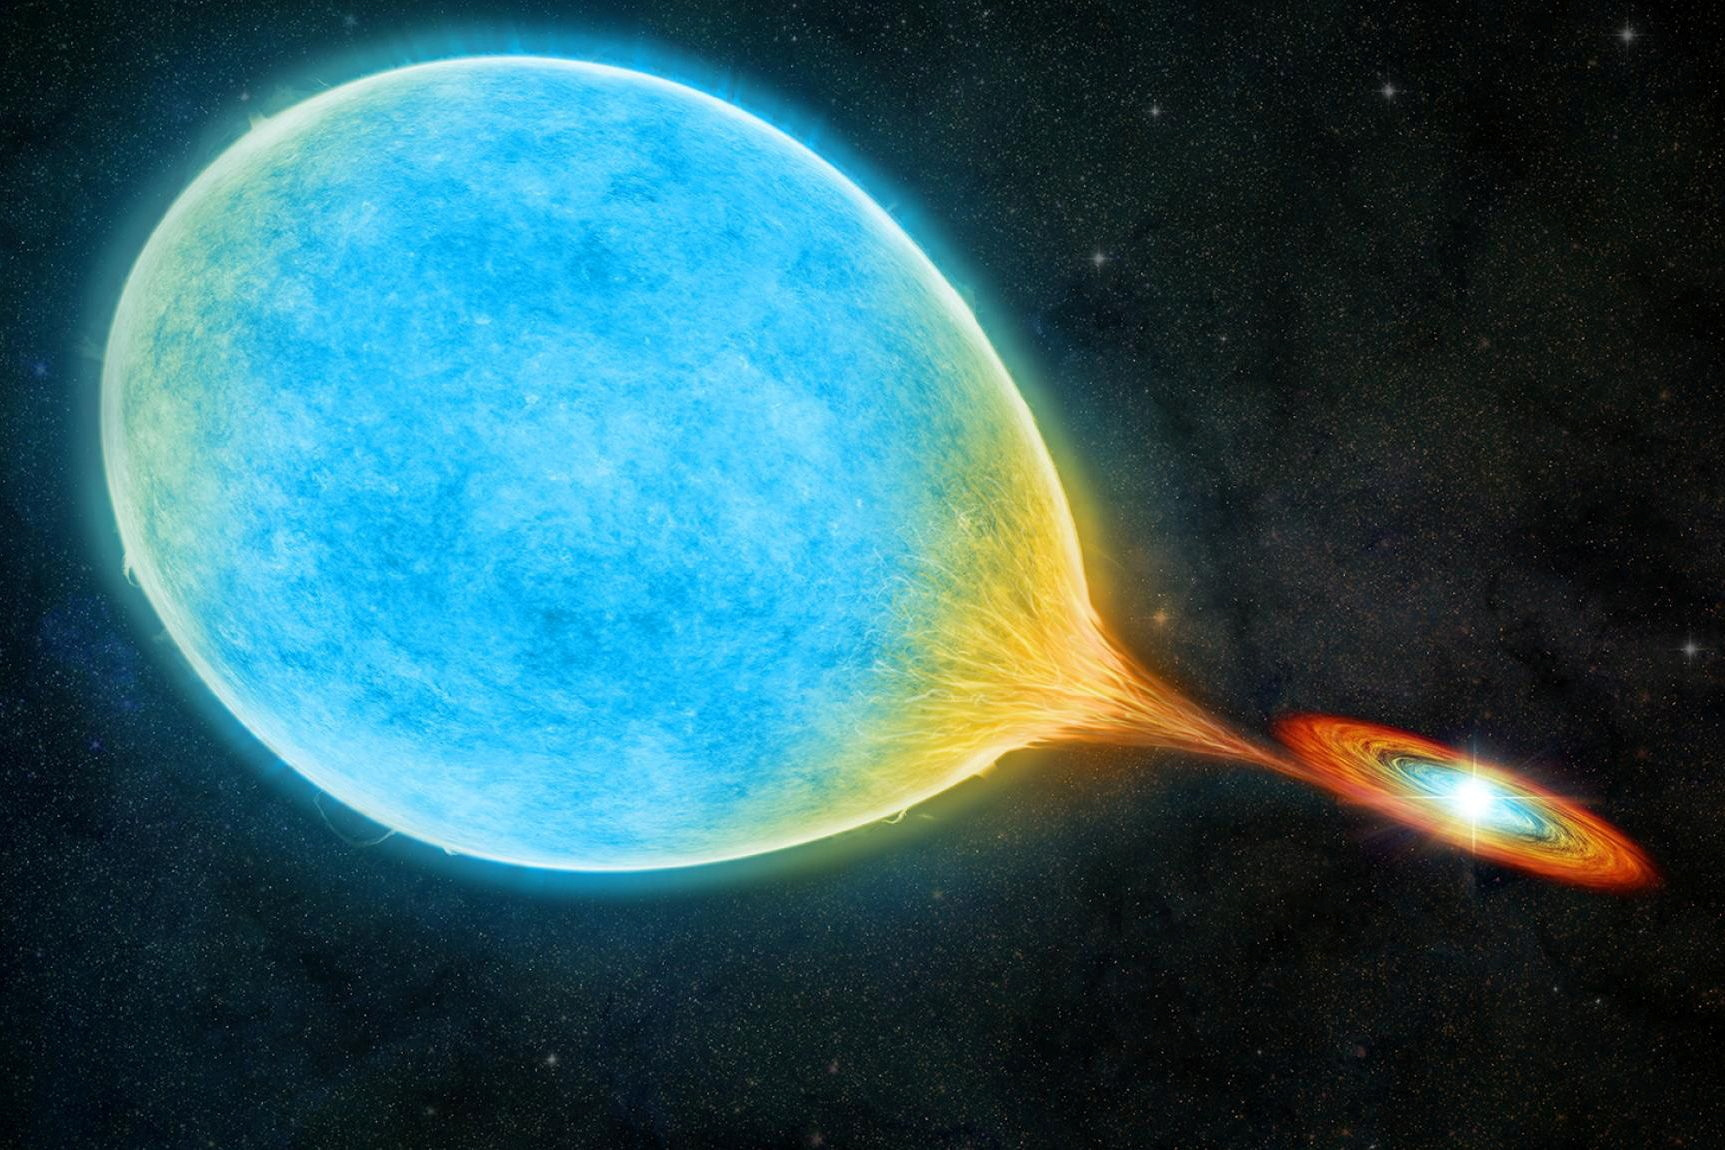 An artist's illustration shows a white dwarf and larger, sun-like star forming a “cataclysmic” binary system